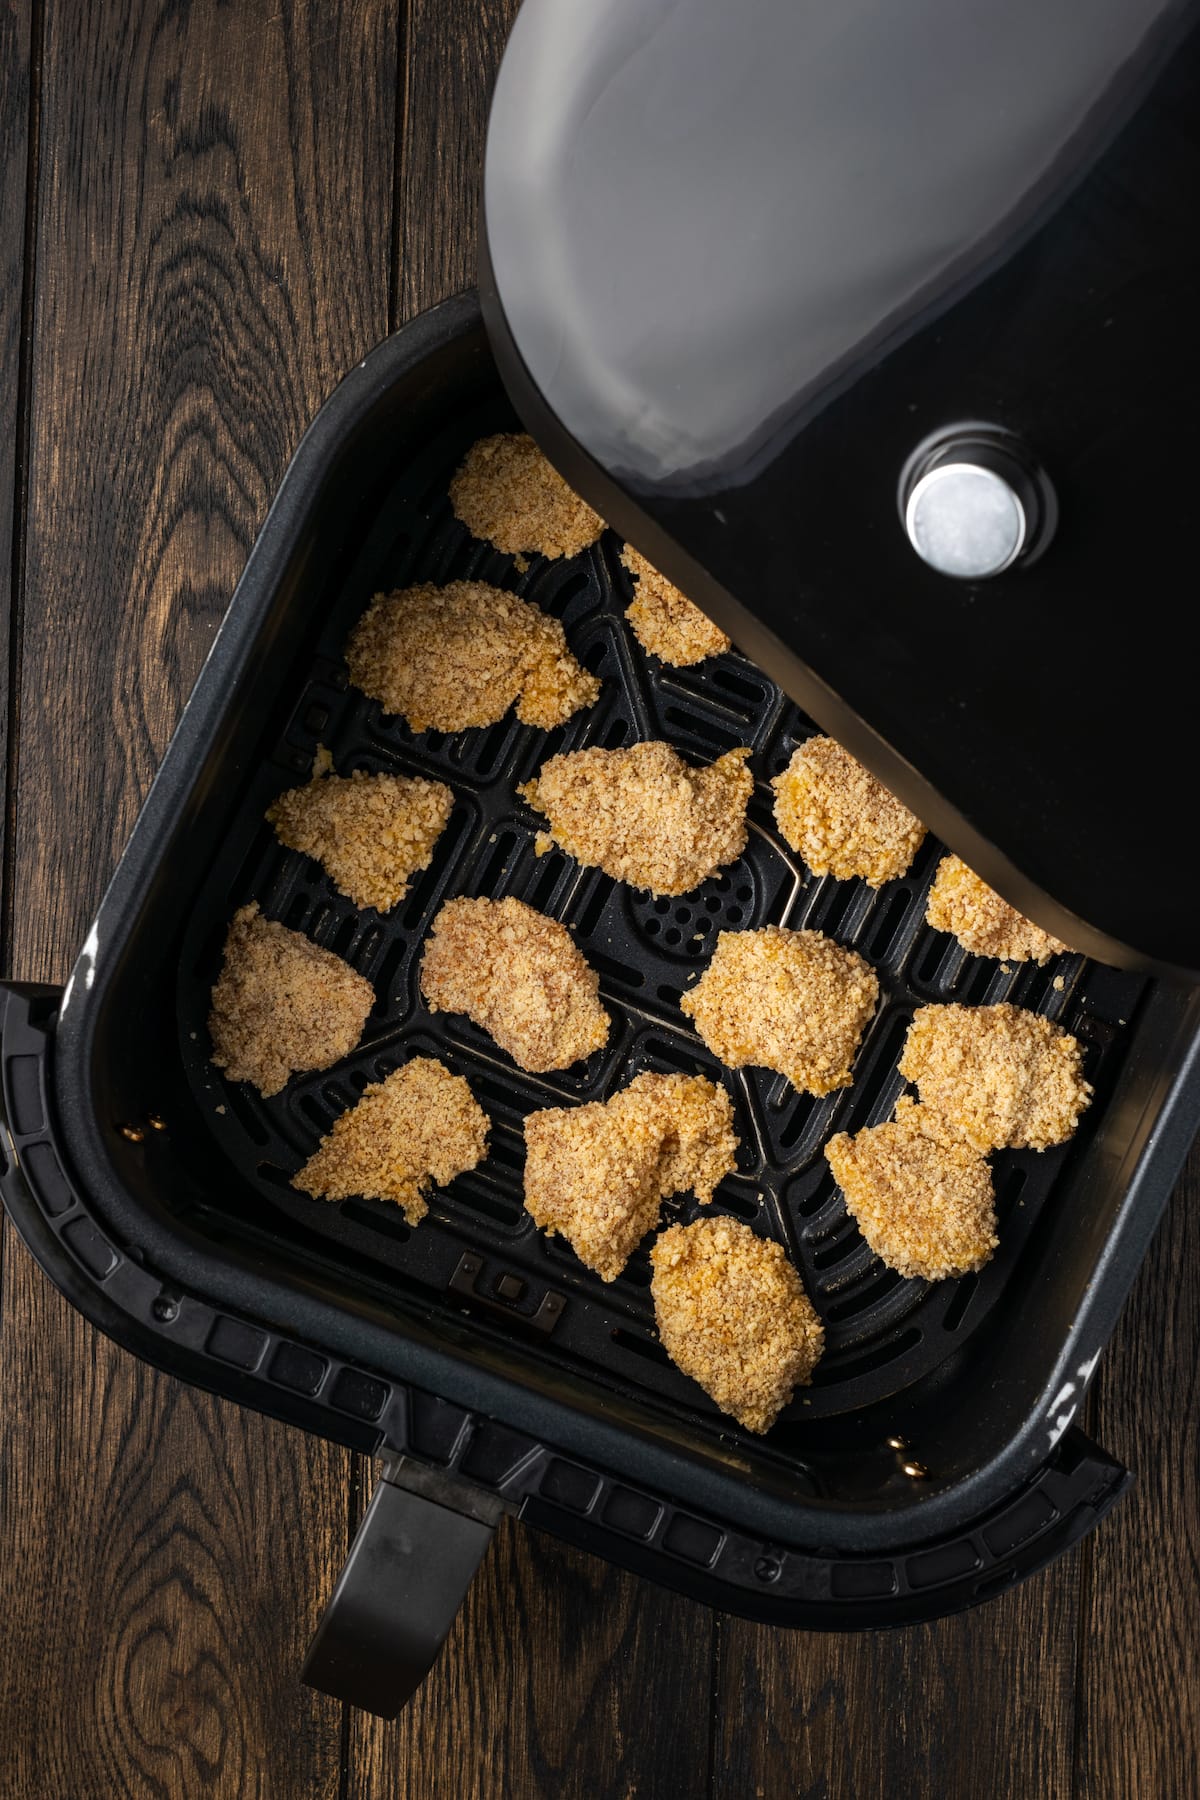 Overhead view of popcorn chicken cooking inside the air fryer.